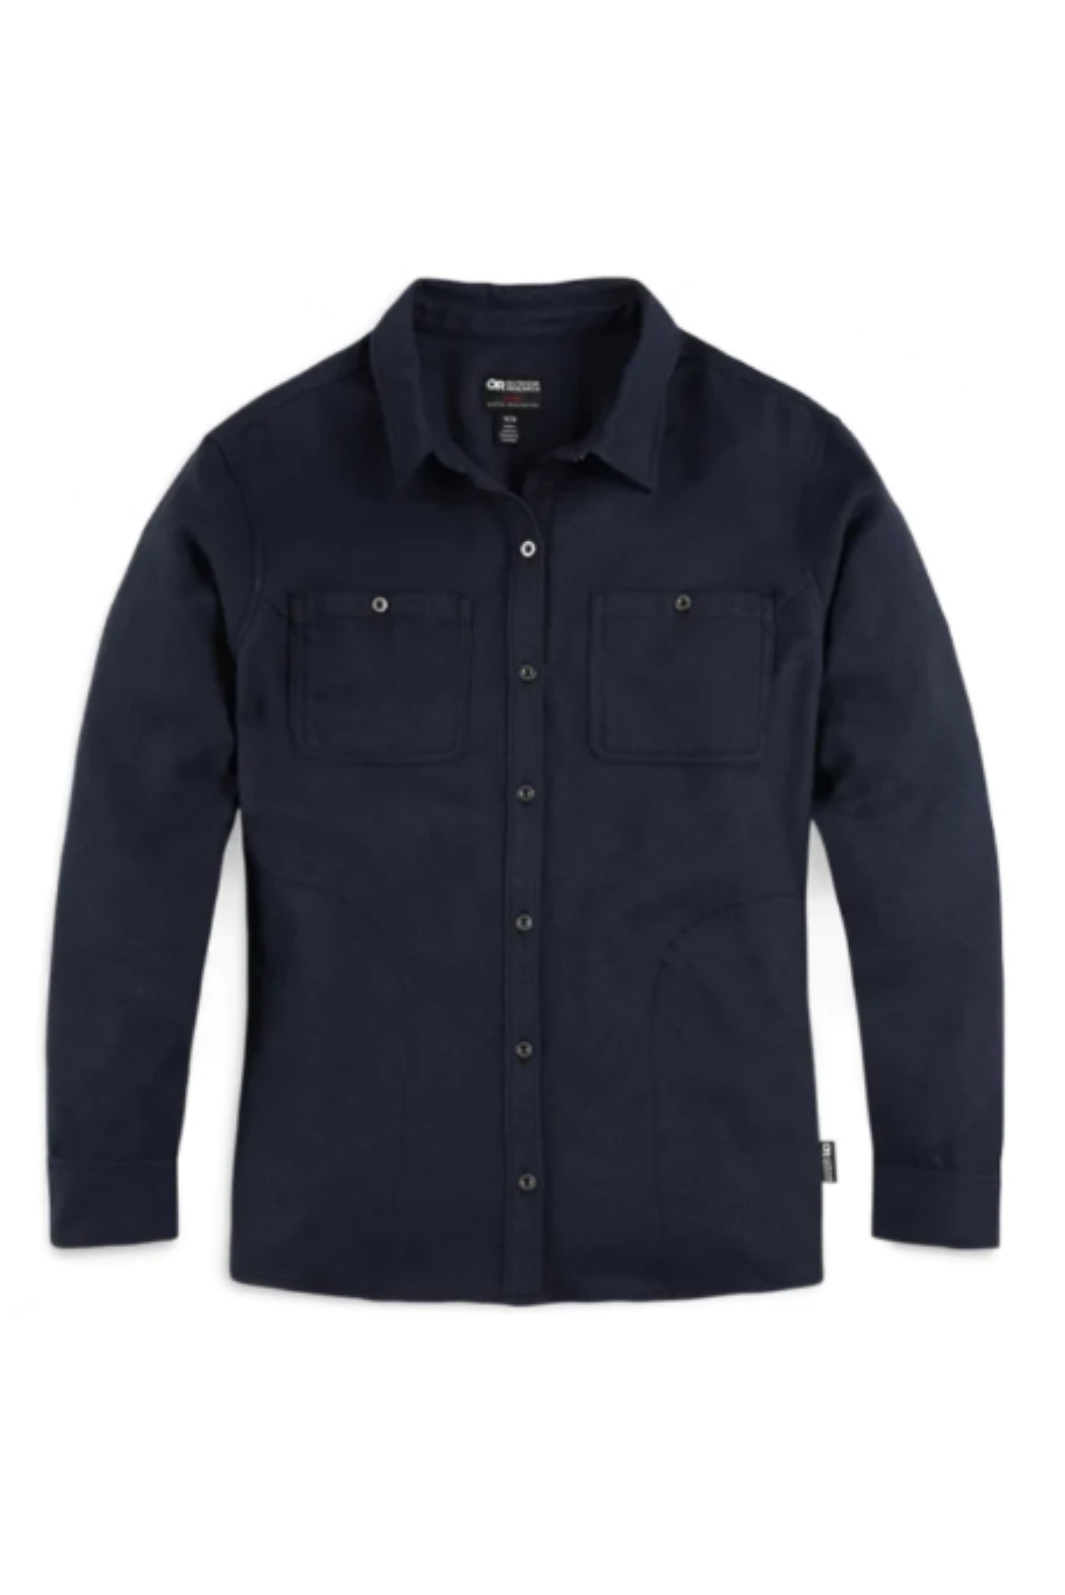 Chemise en flanelle Feedback Taille Plus d'Outdoor Research